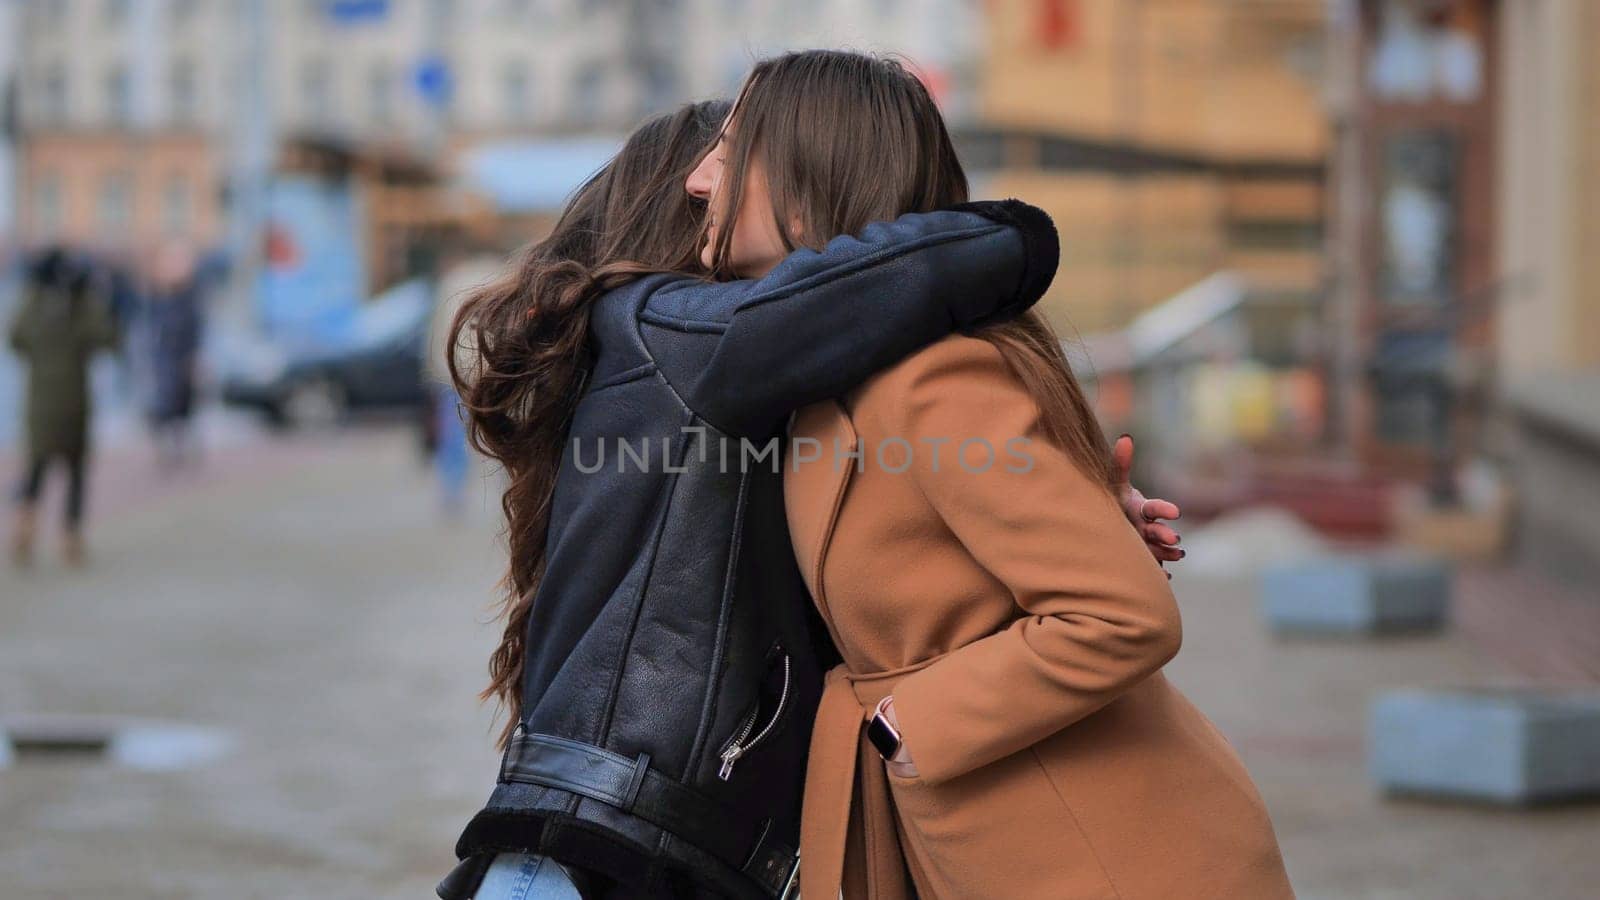 Two best friends meet on the streets of the city and hug